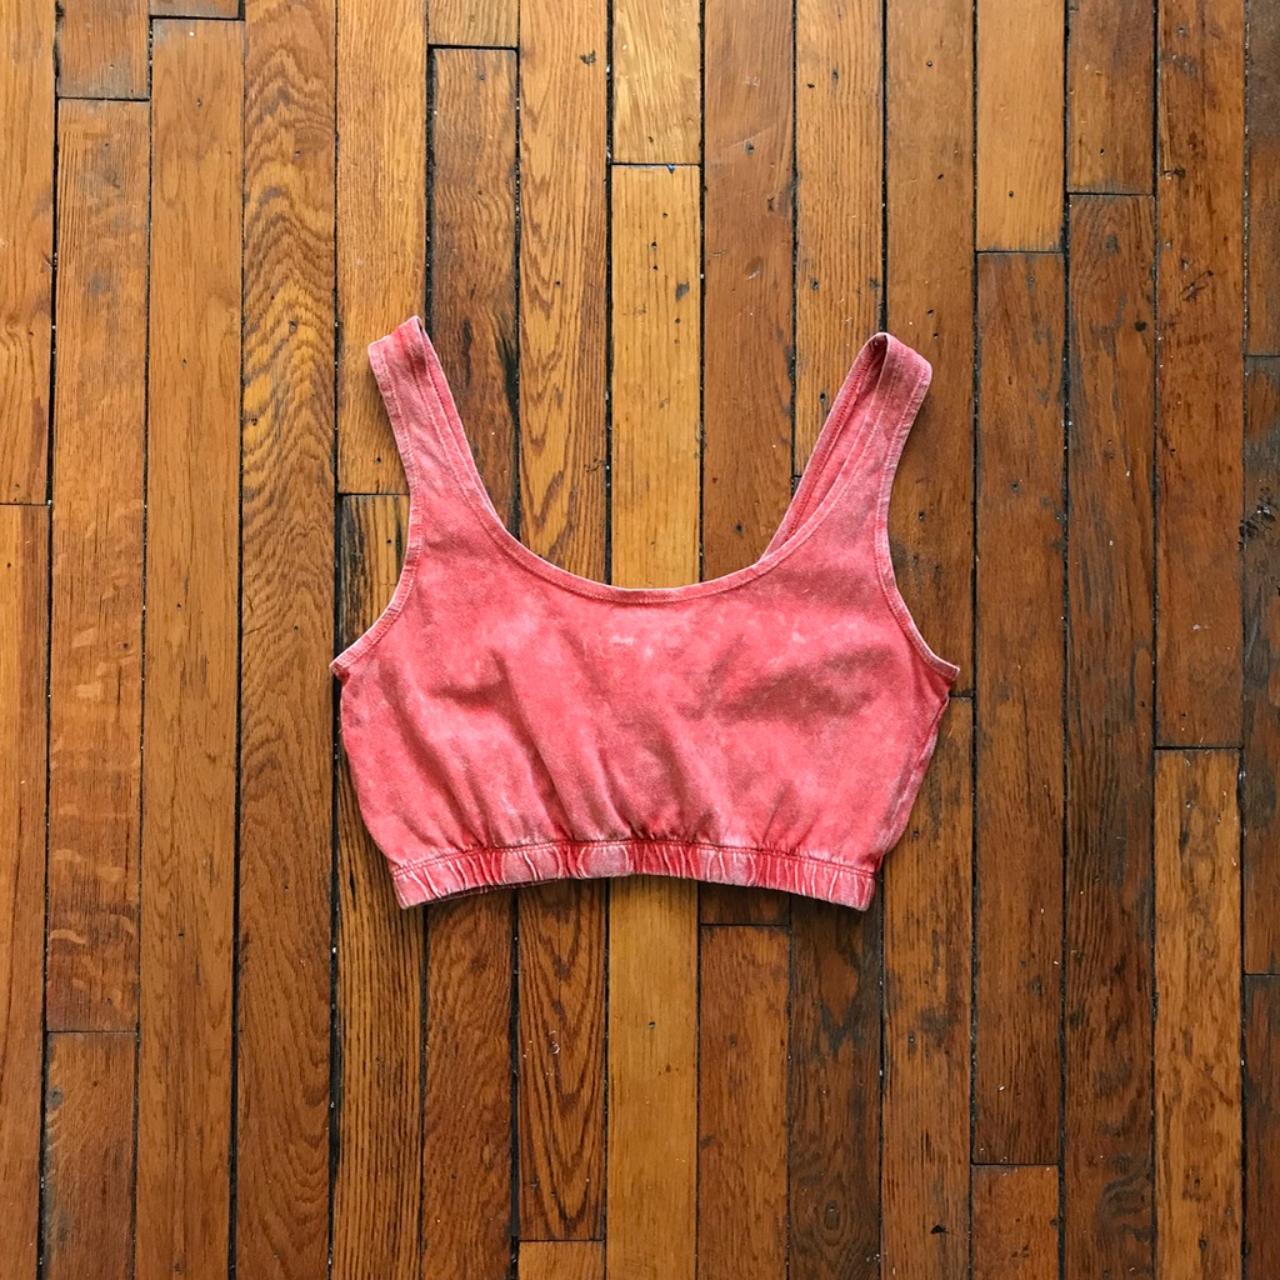 Urban Outfitters Women's Pink and Orange Vests-tanks-camis (4)